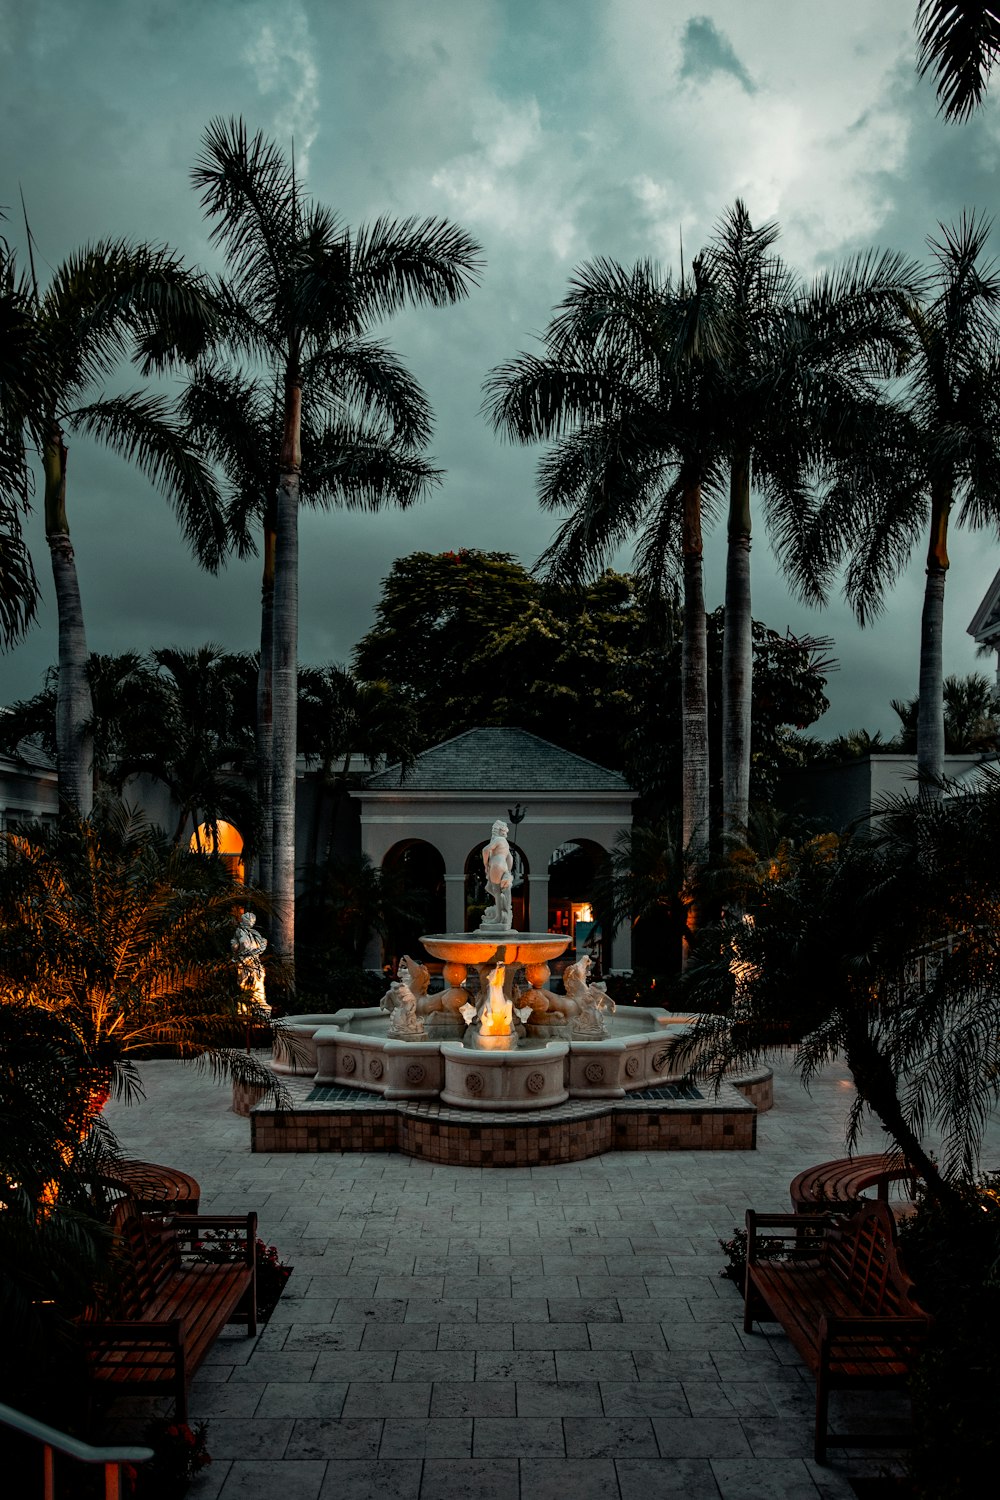 brown and white fountain surrounded by palm trees